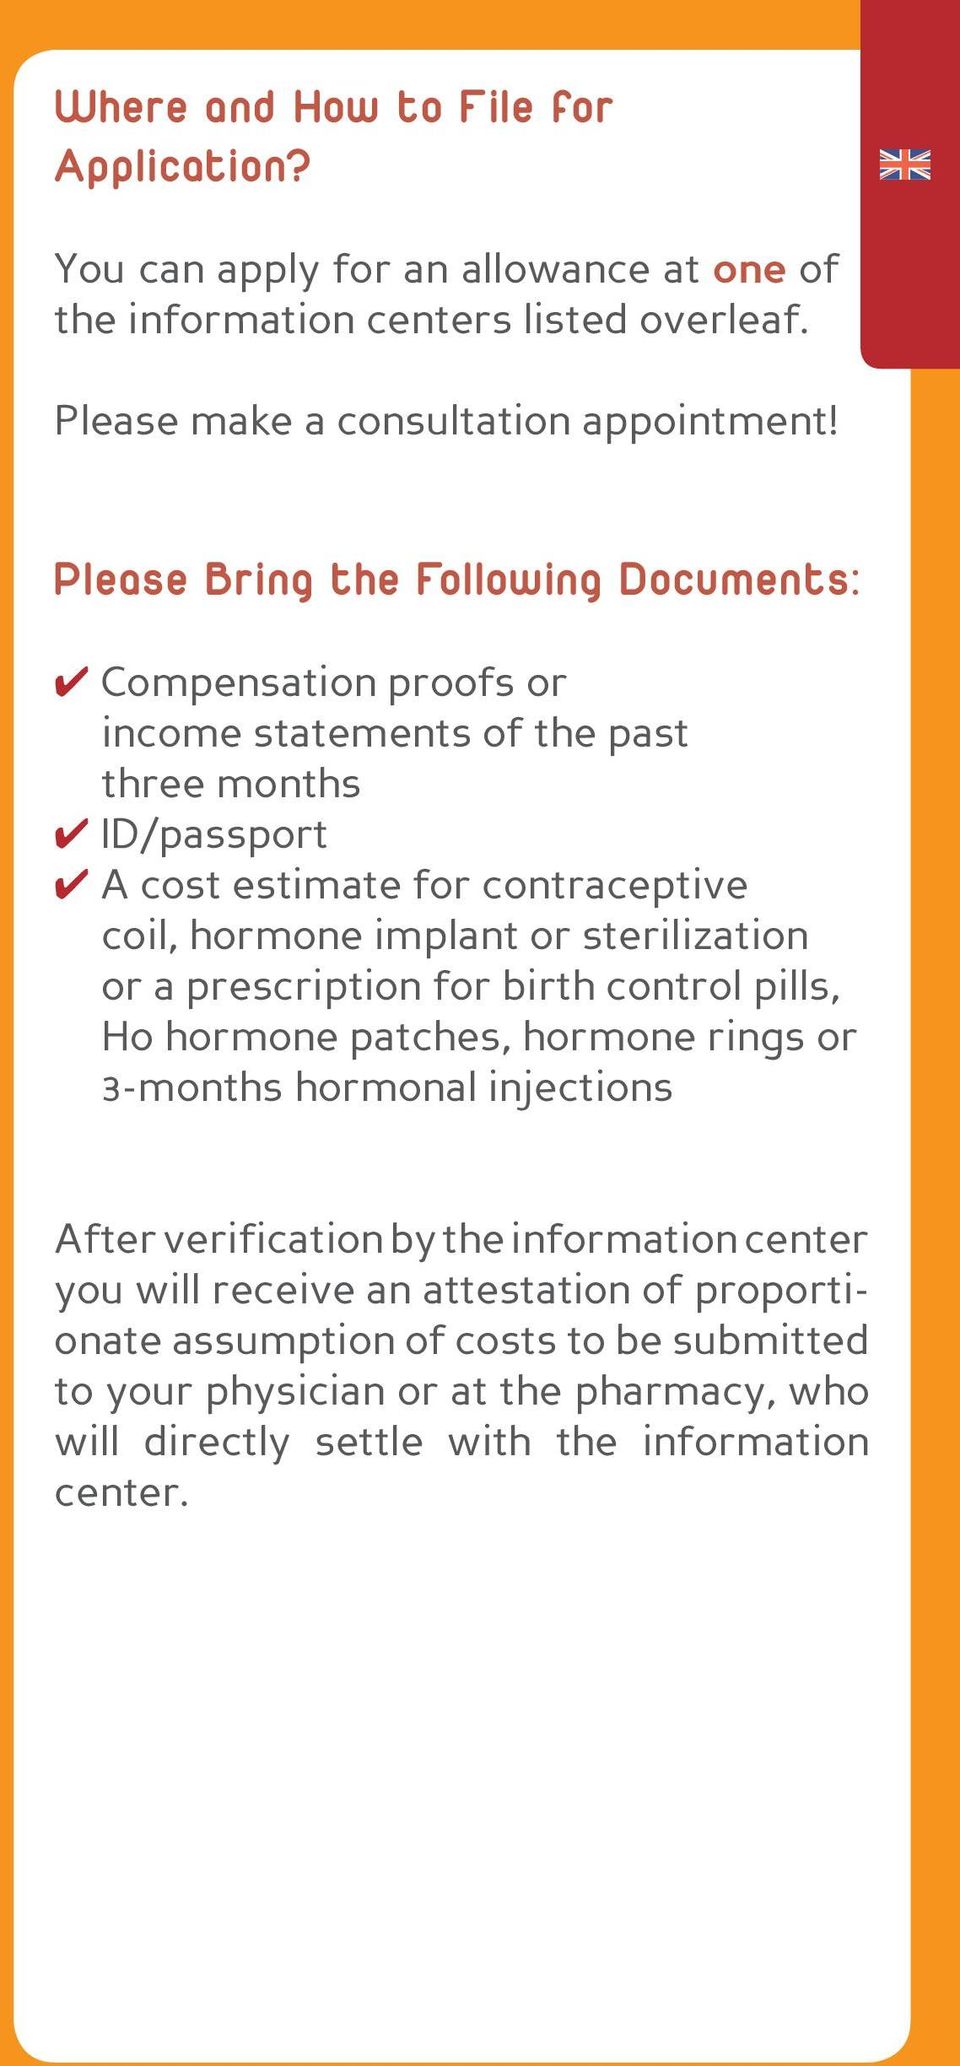 implant or sterilization or a prescription for birth control pills, Ho hormone patches, hormone rings or 3-months hormonal injections After verification by the information